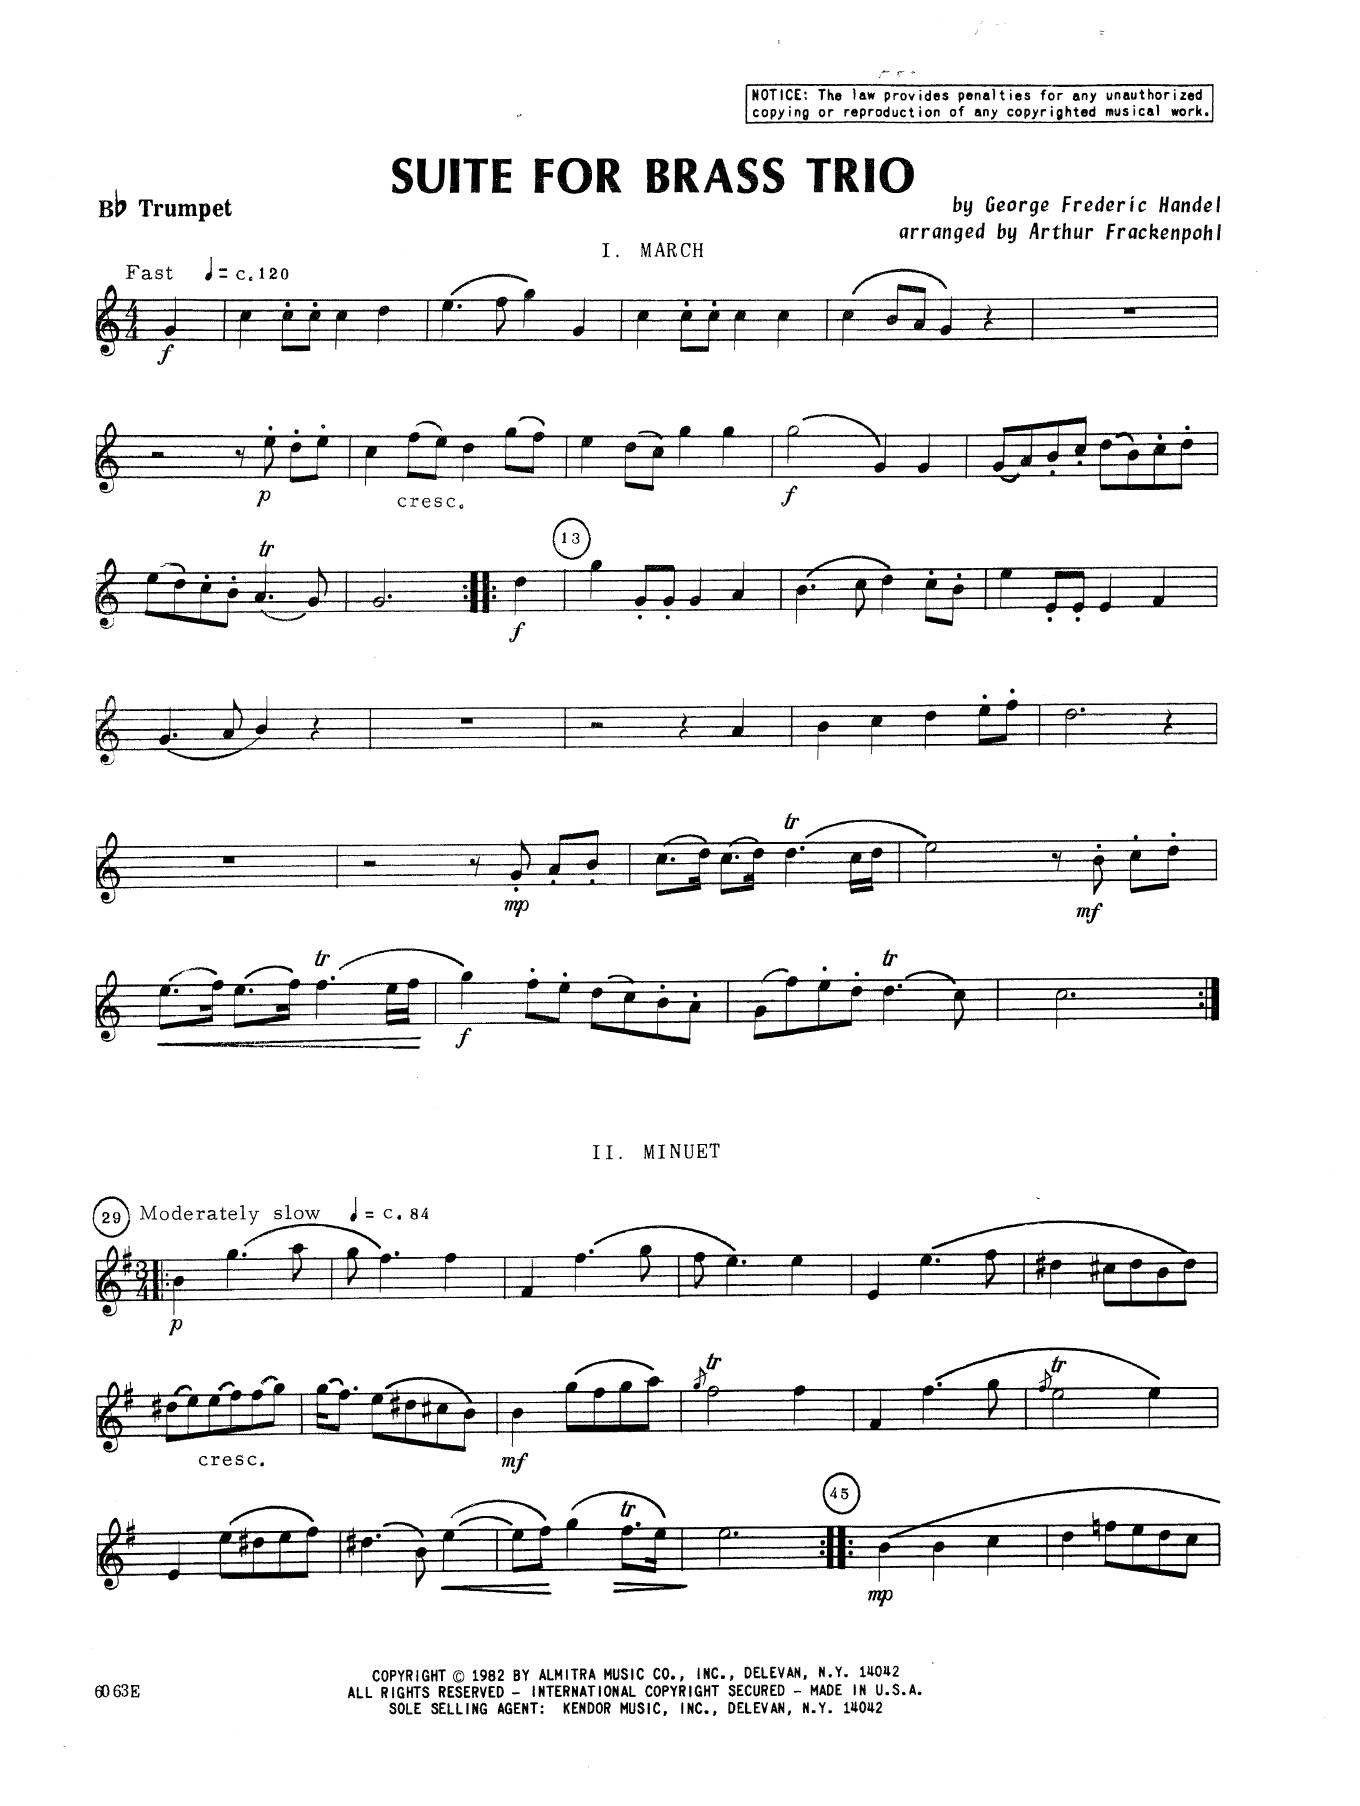 Download Frackenpohl Suite For Brass Trio - Bb Trumpet Sheet Music